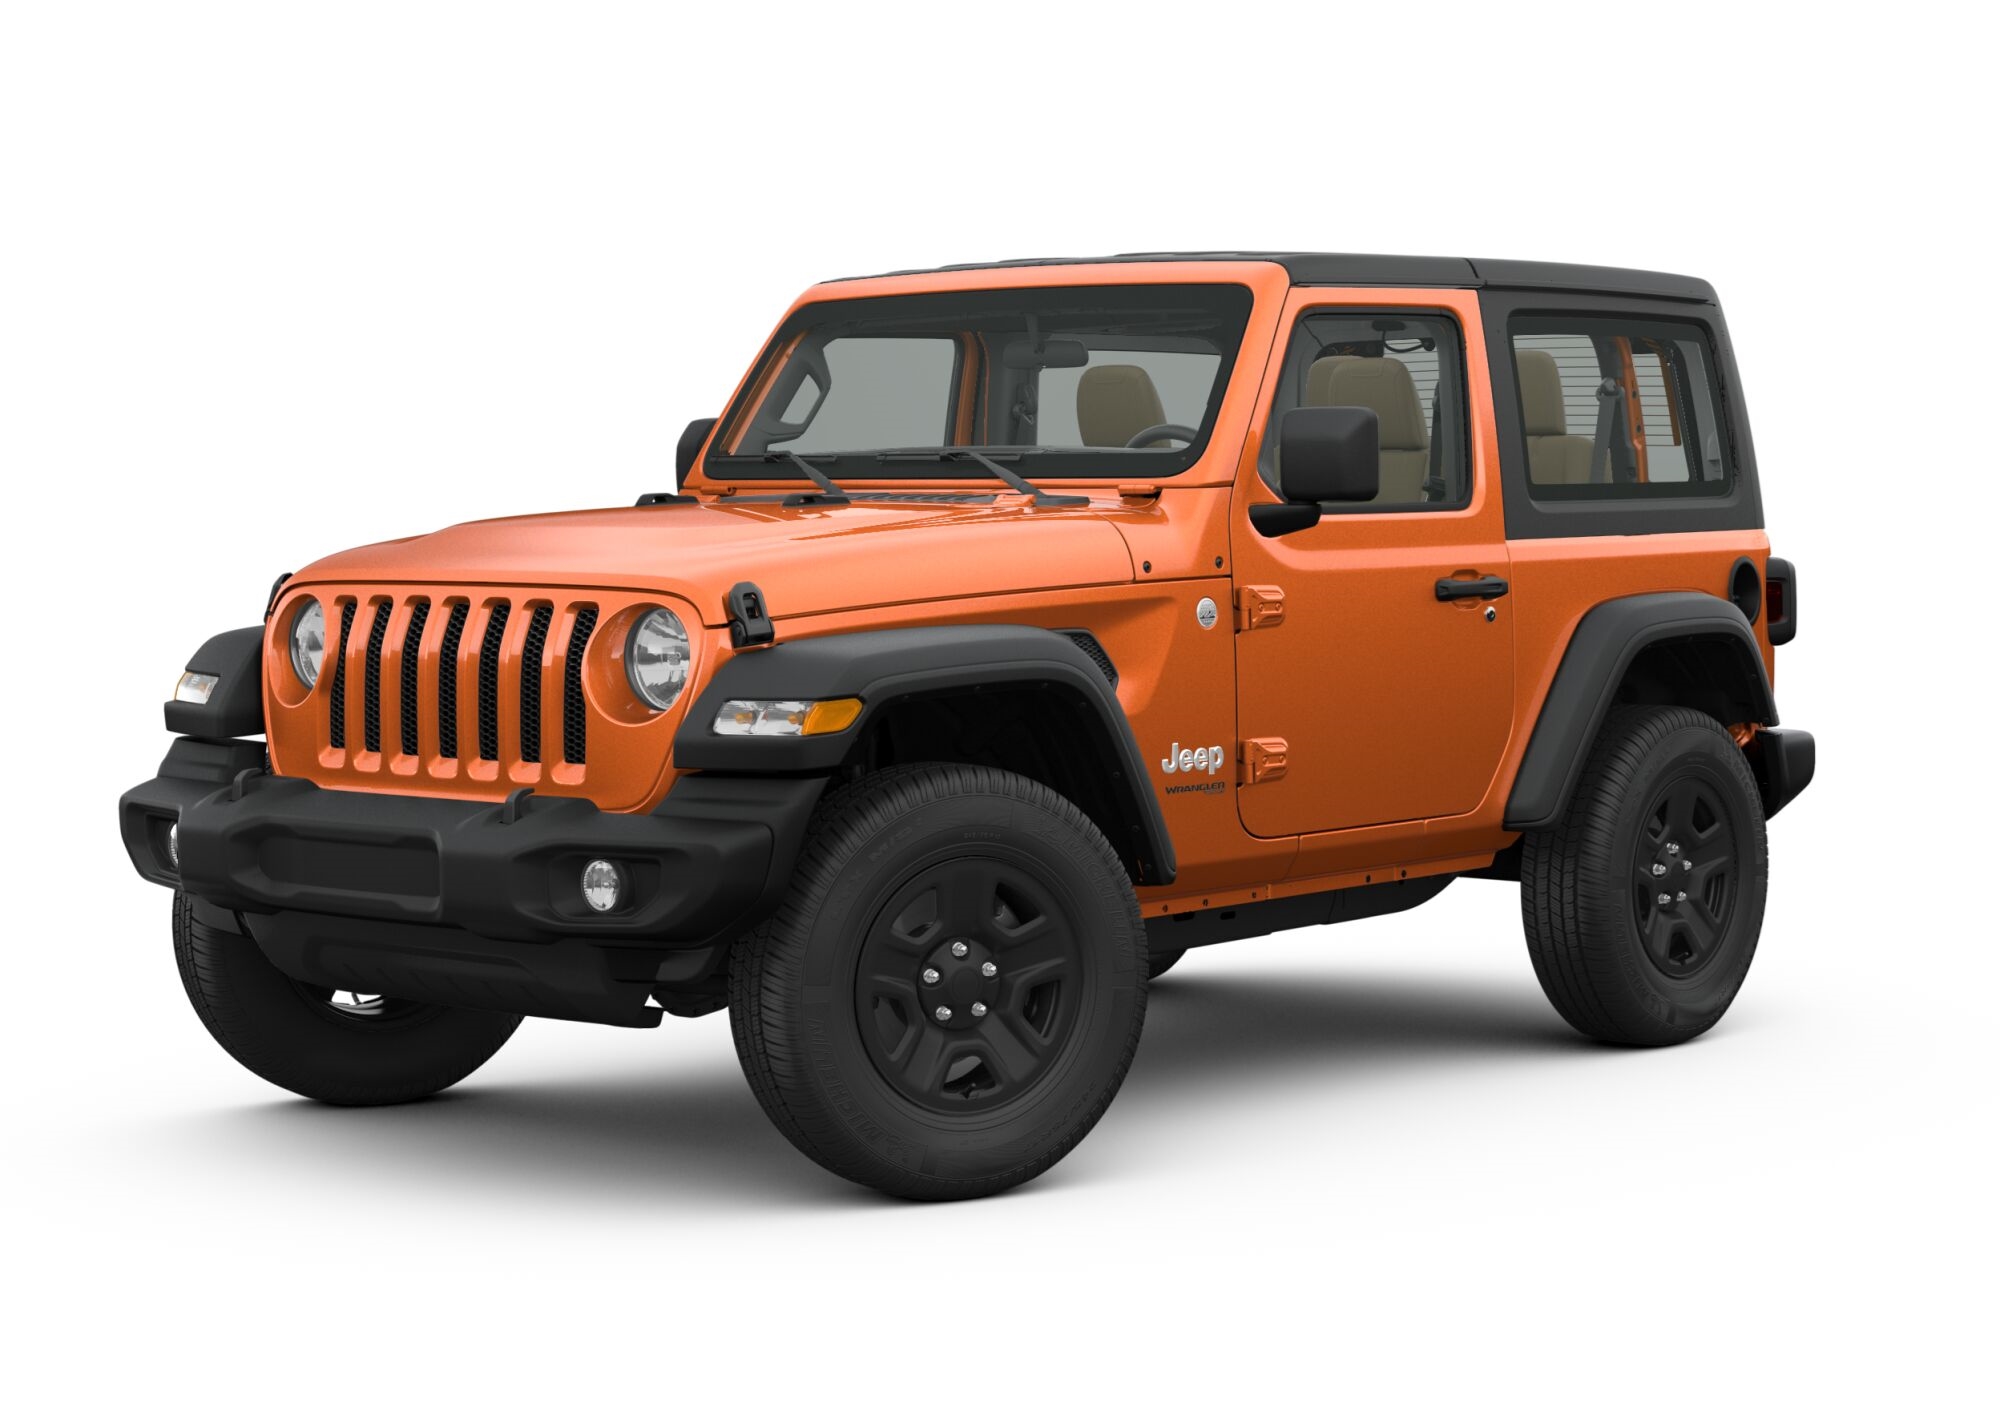 2020 Jeep Wrangler Rubicon Full Specs, Features and Price | CarBuzz